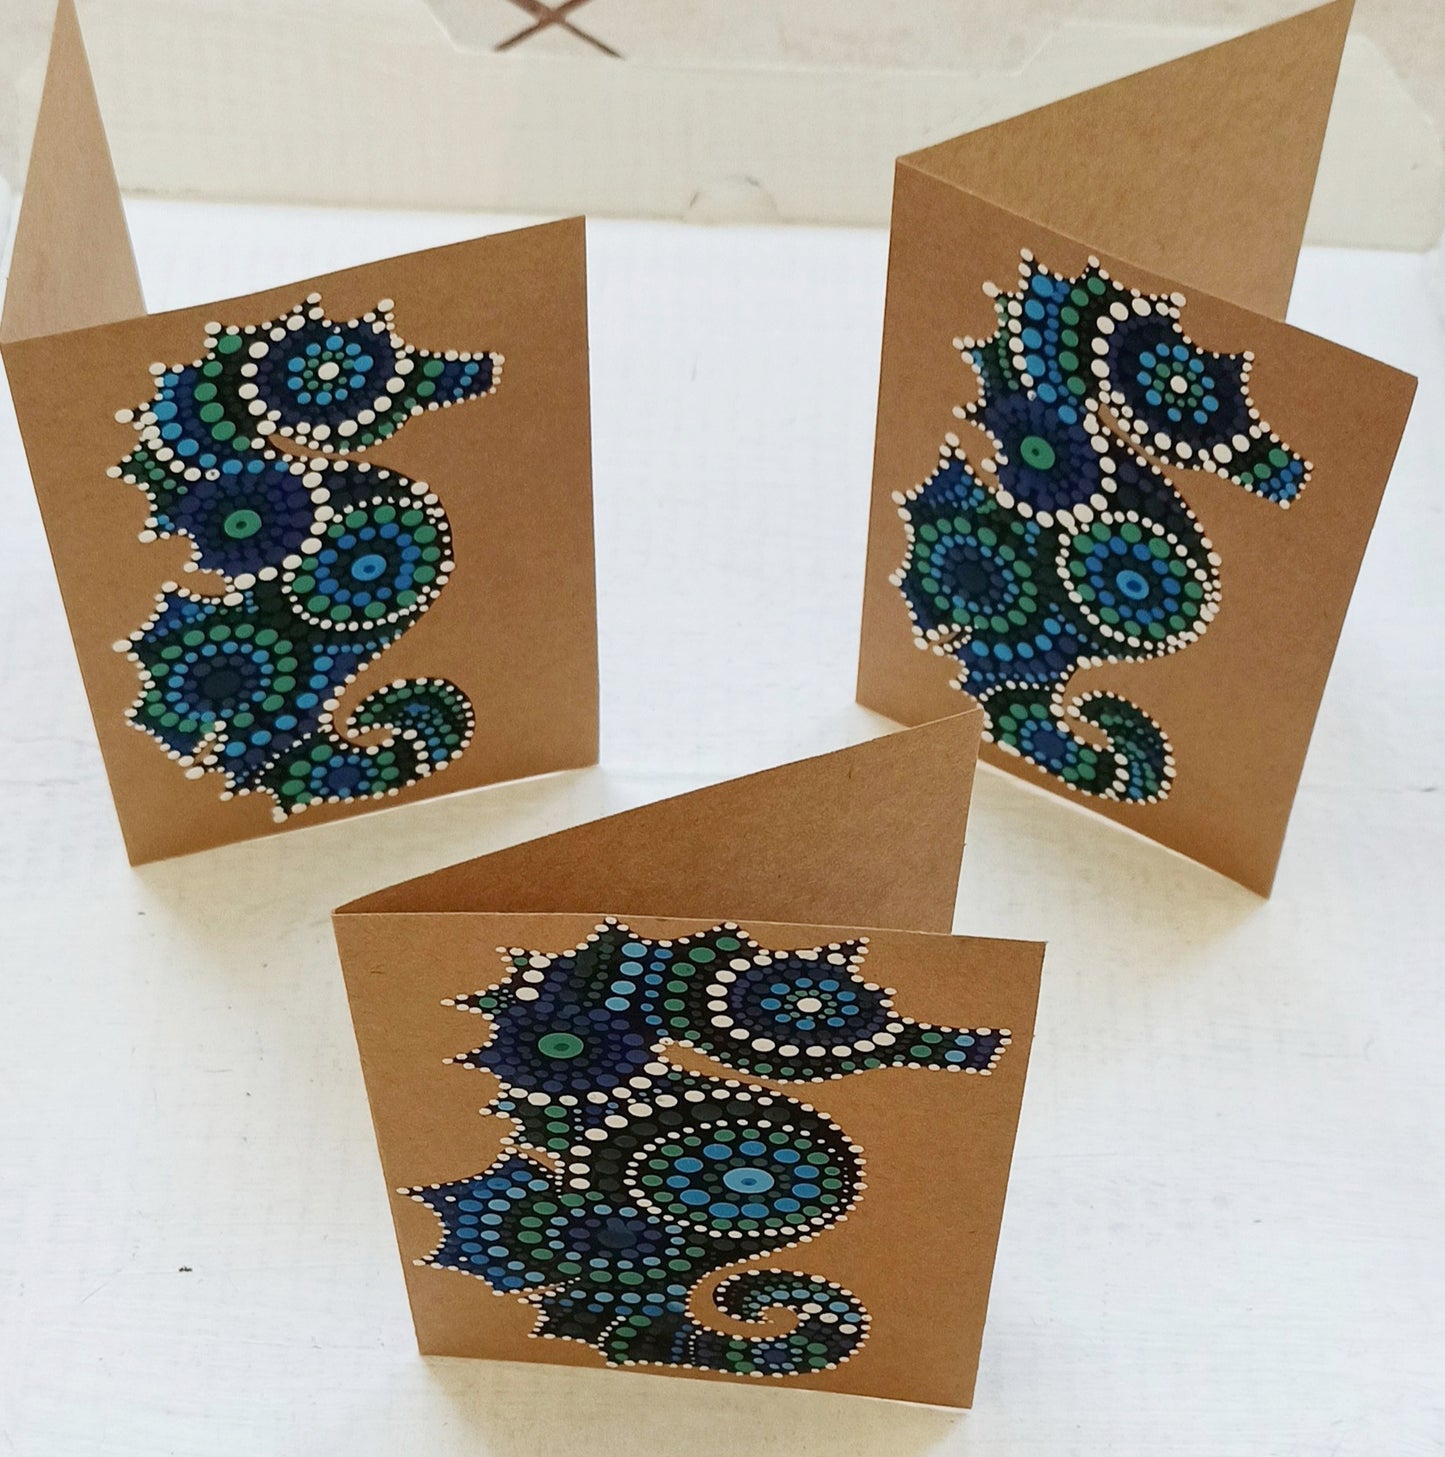 HandPainted Seahorse and Sting Ray Mandala painted Blue and Green dot Art Greetings Cards on Kraft Card